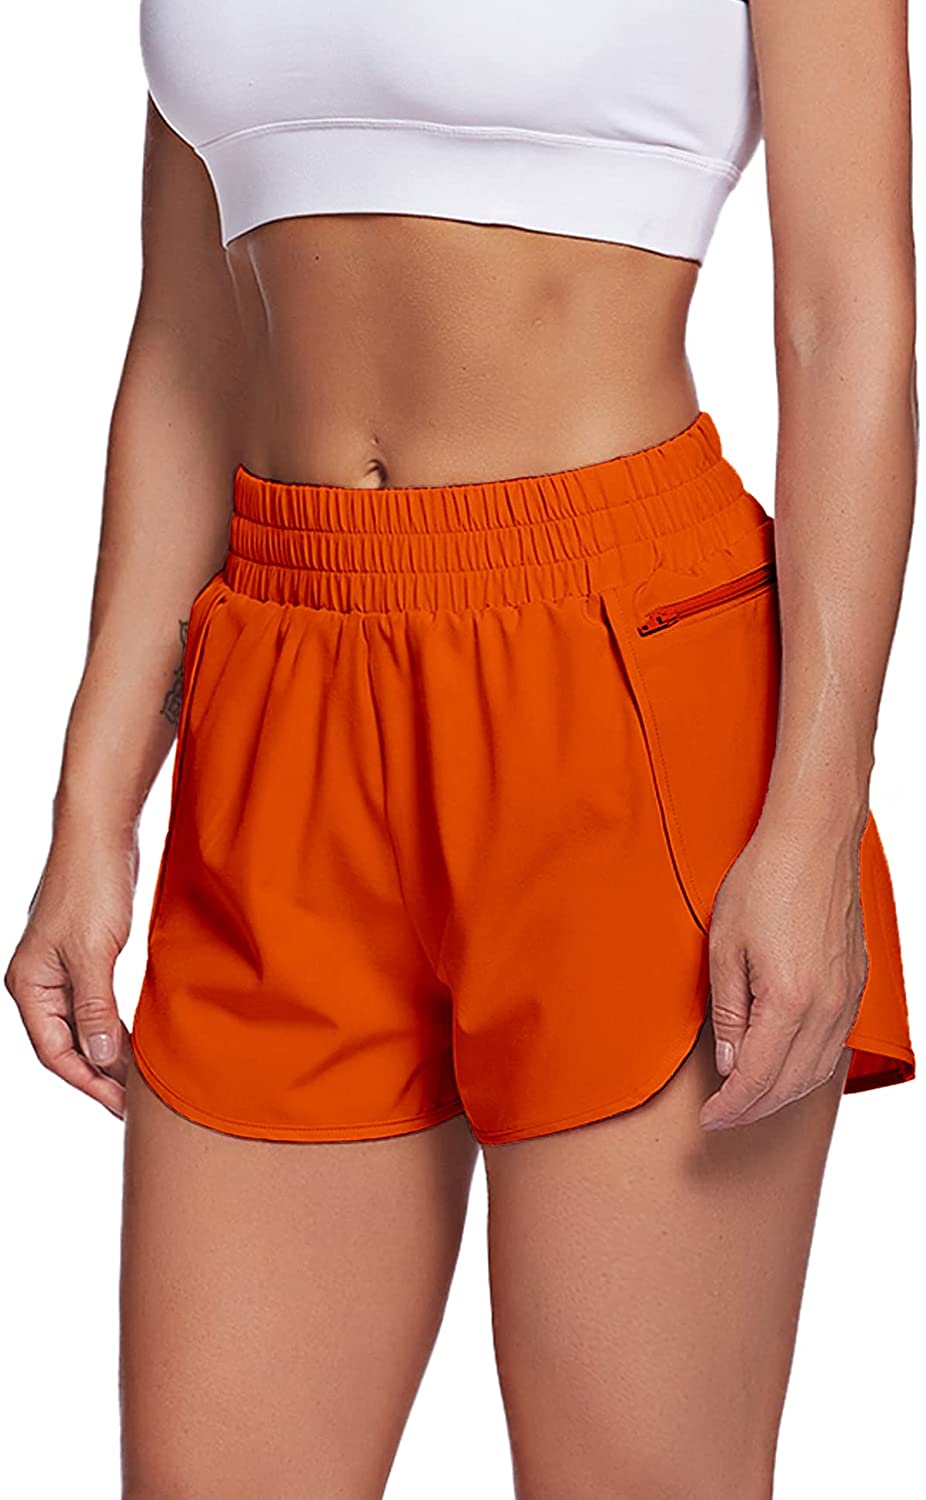 SWSMCLT Women's Elastic High Waisted Athletic Shorts Gym Workout with  Pockets Casual Lightweight Running Smocked Quick Dry Summer Beach Orange  Large